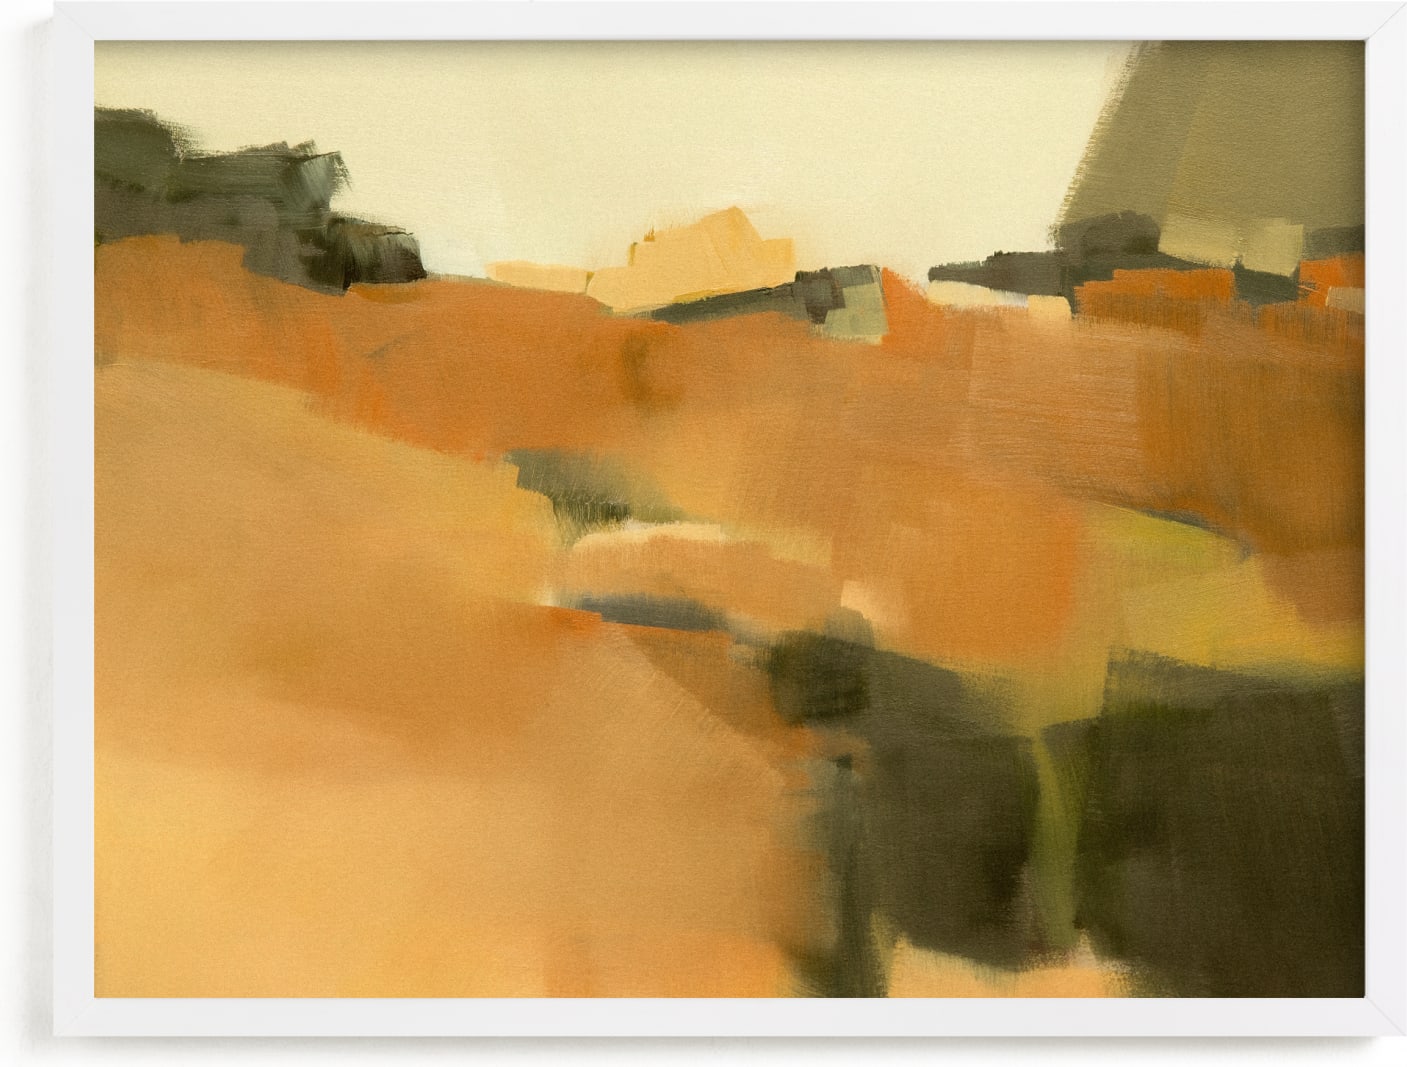 This is a yellow art by Ashley Armistead called Strata.